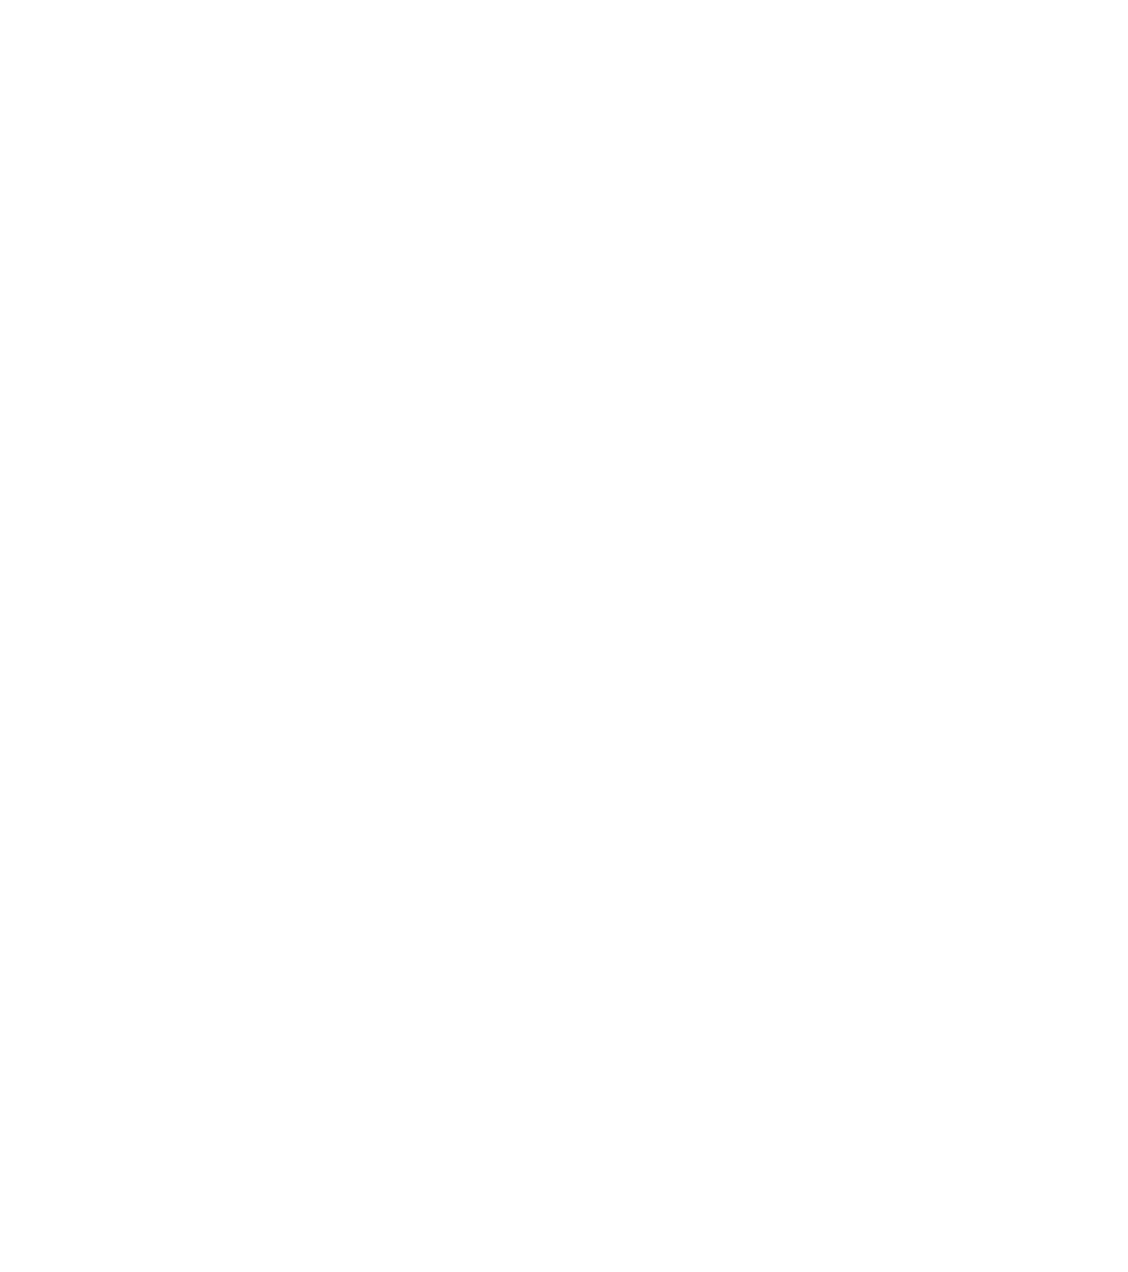 1.Dr. Garth James, Montana State University Center for Biofilm Education; Next Science report TR 02 14 025. 2.Antimic...